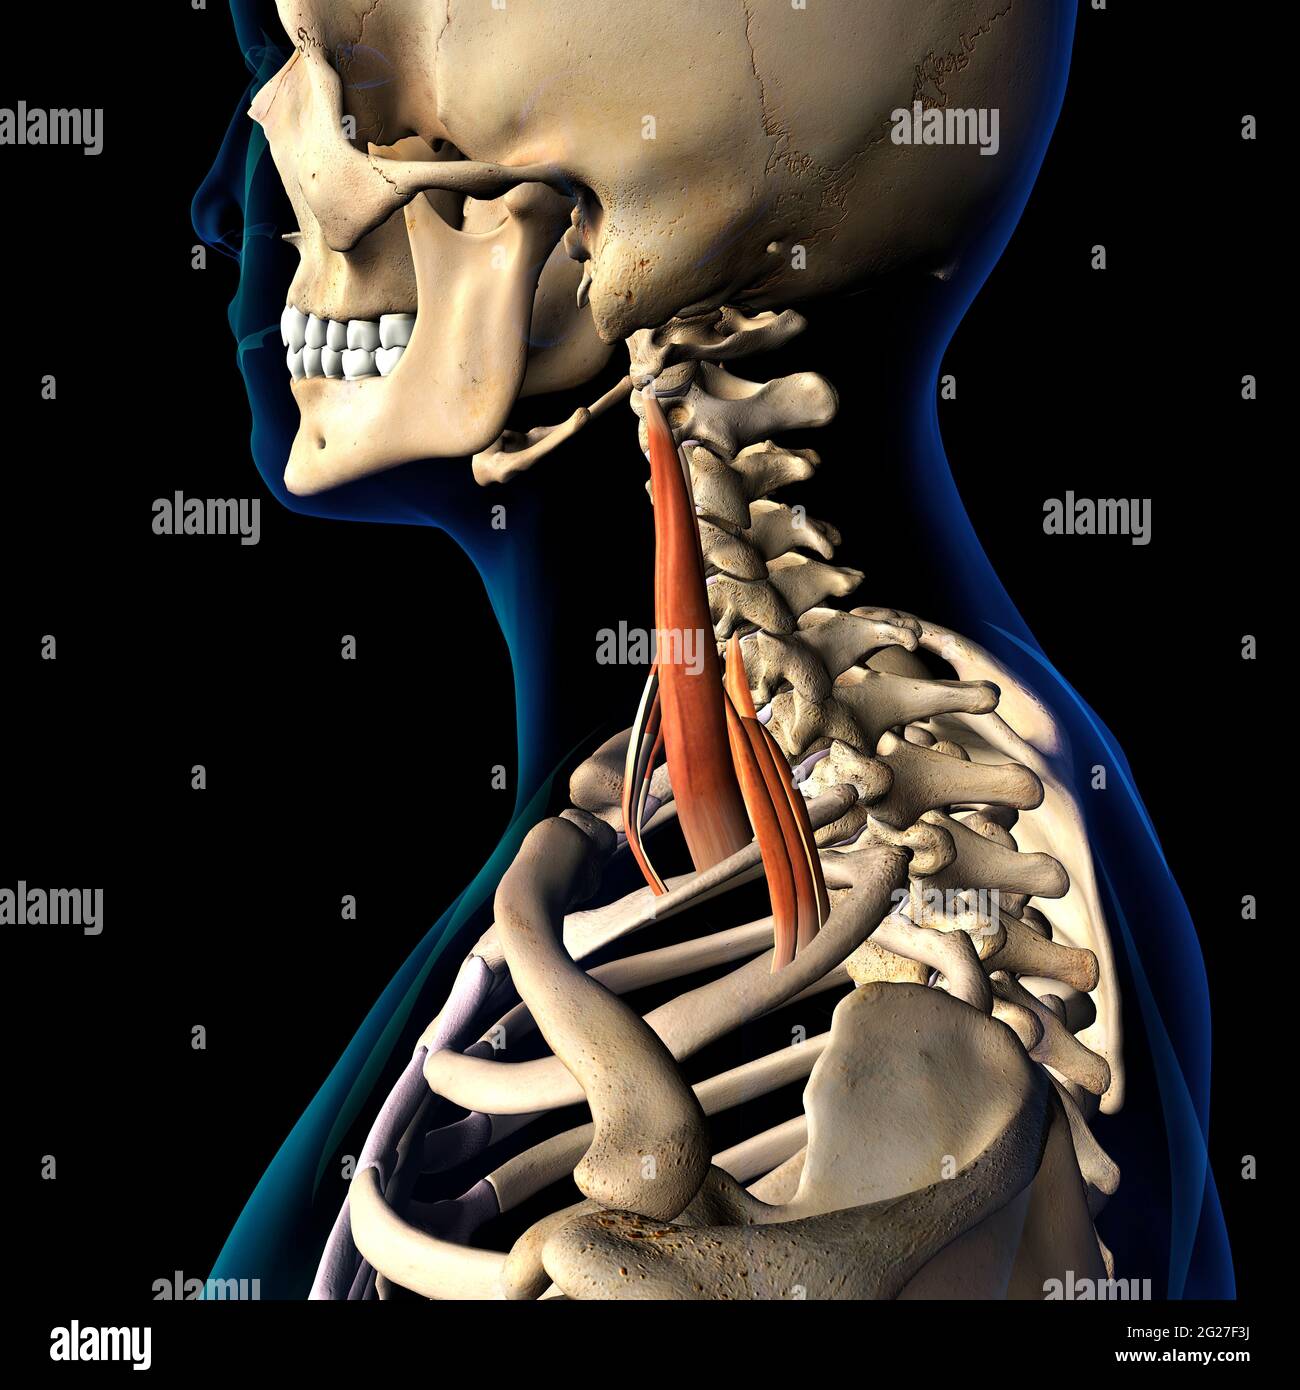 Scalene neck muscles Isolated within skeletal system, on black background. Stock Photo